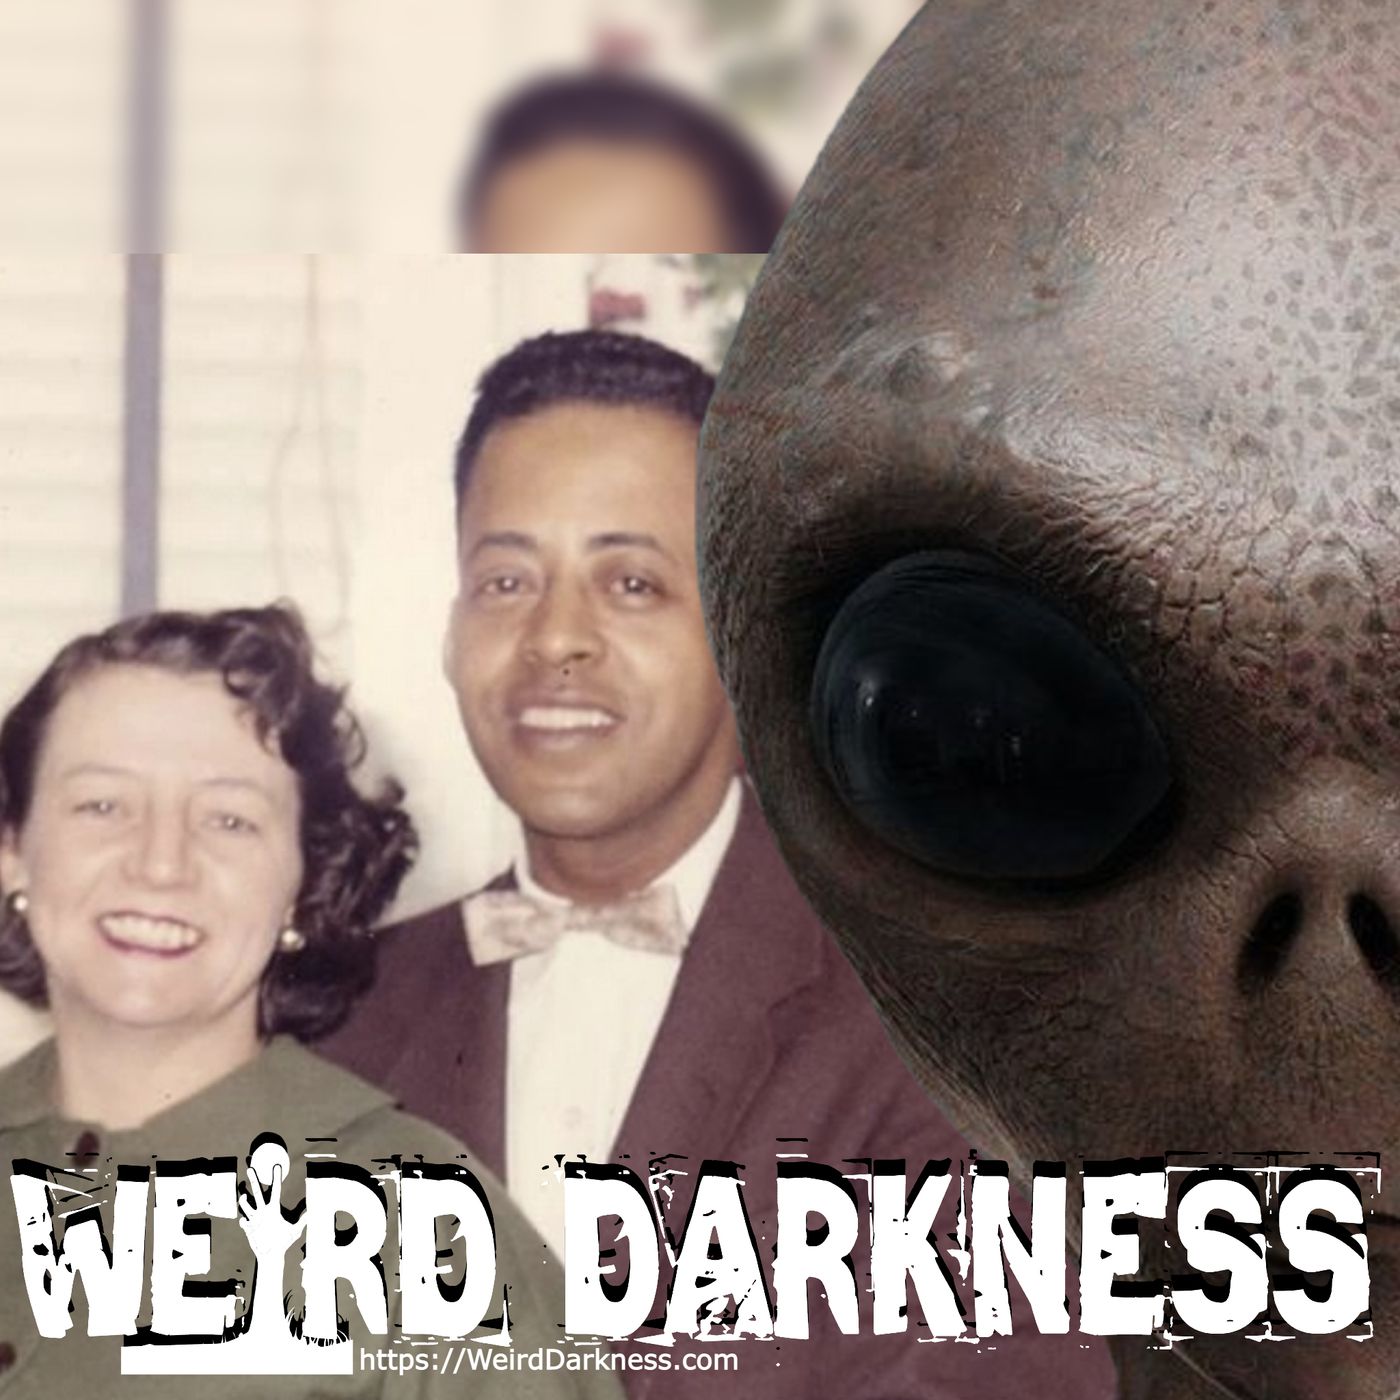 ufo abduction of betty and barney hill